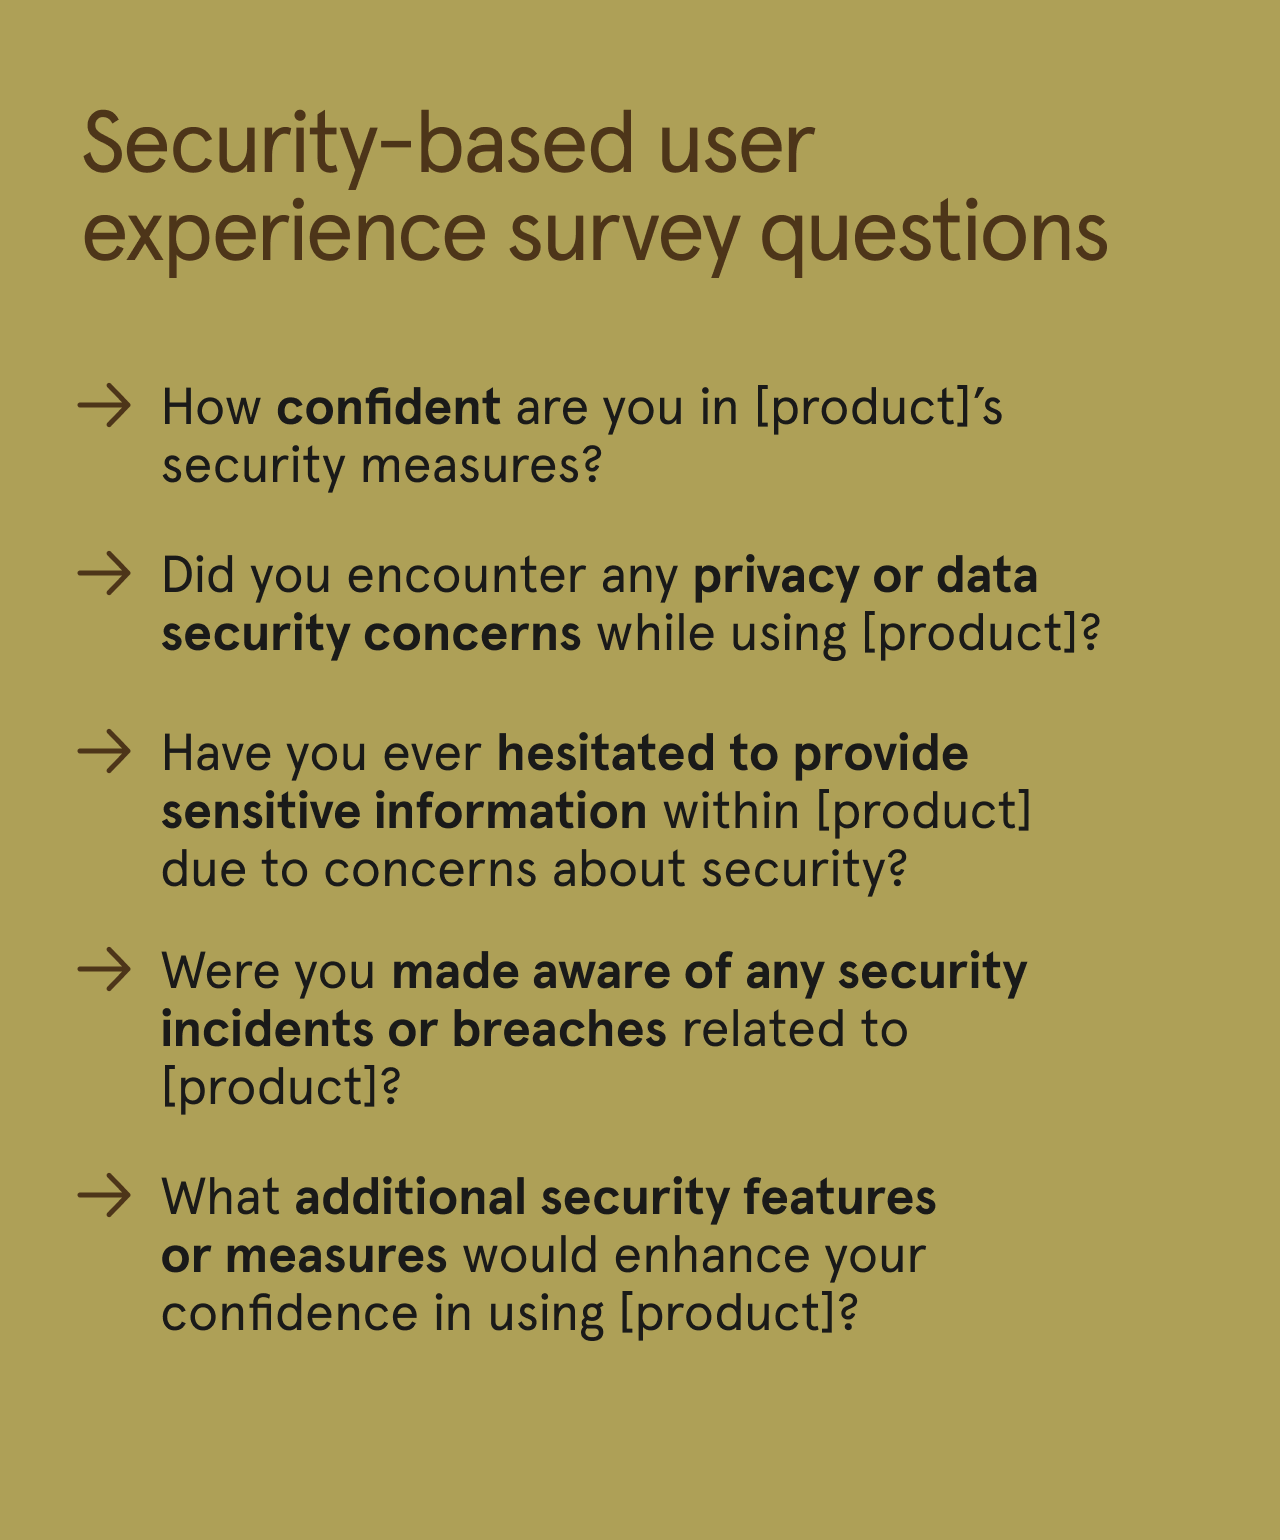 List of security-based user experience survey questions.